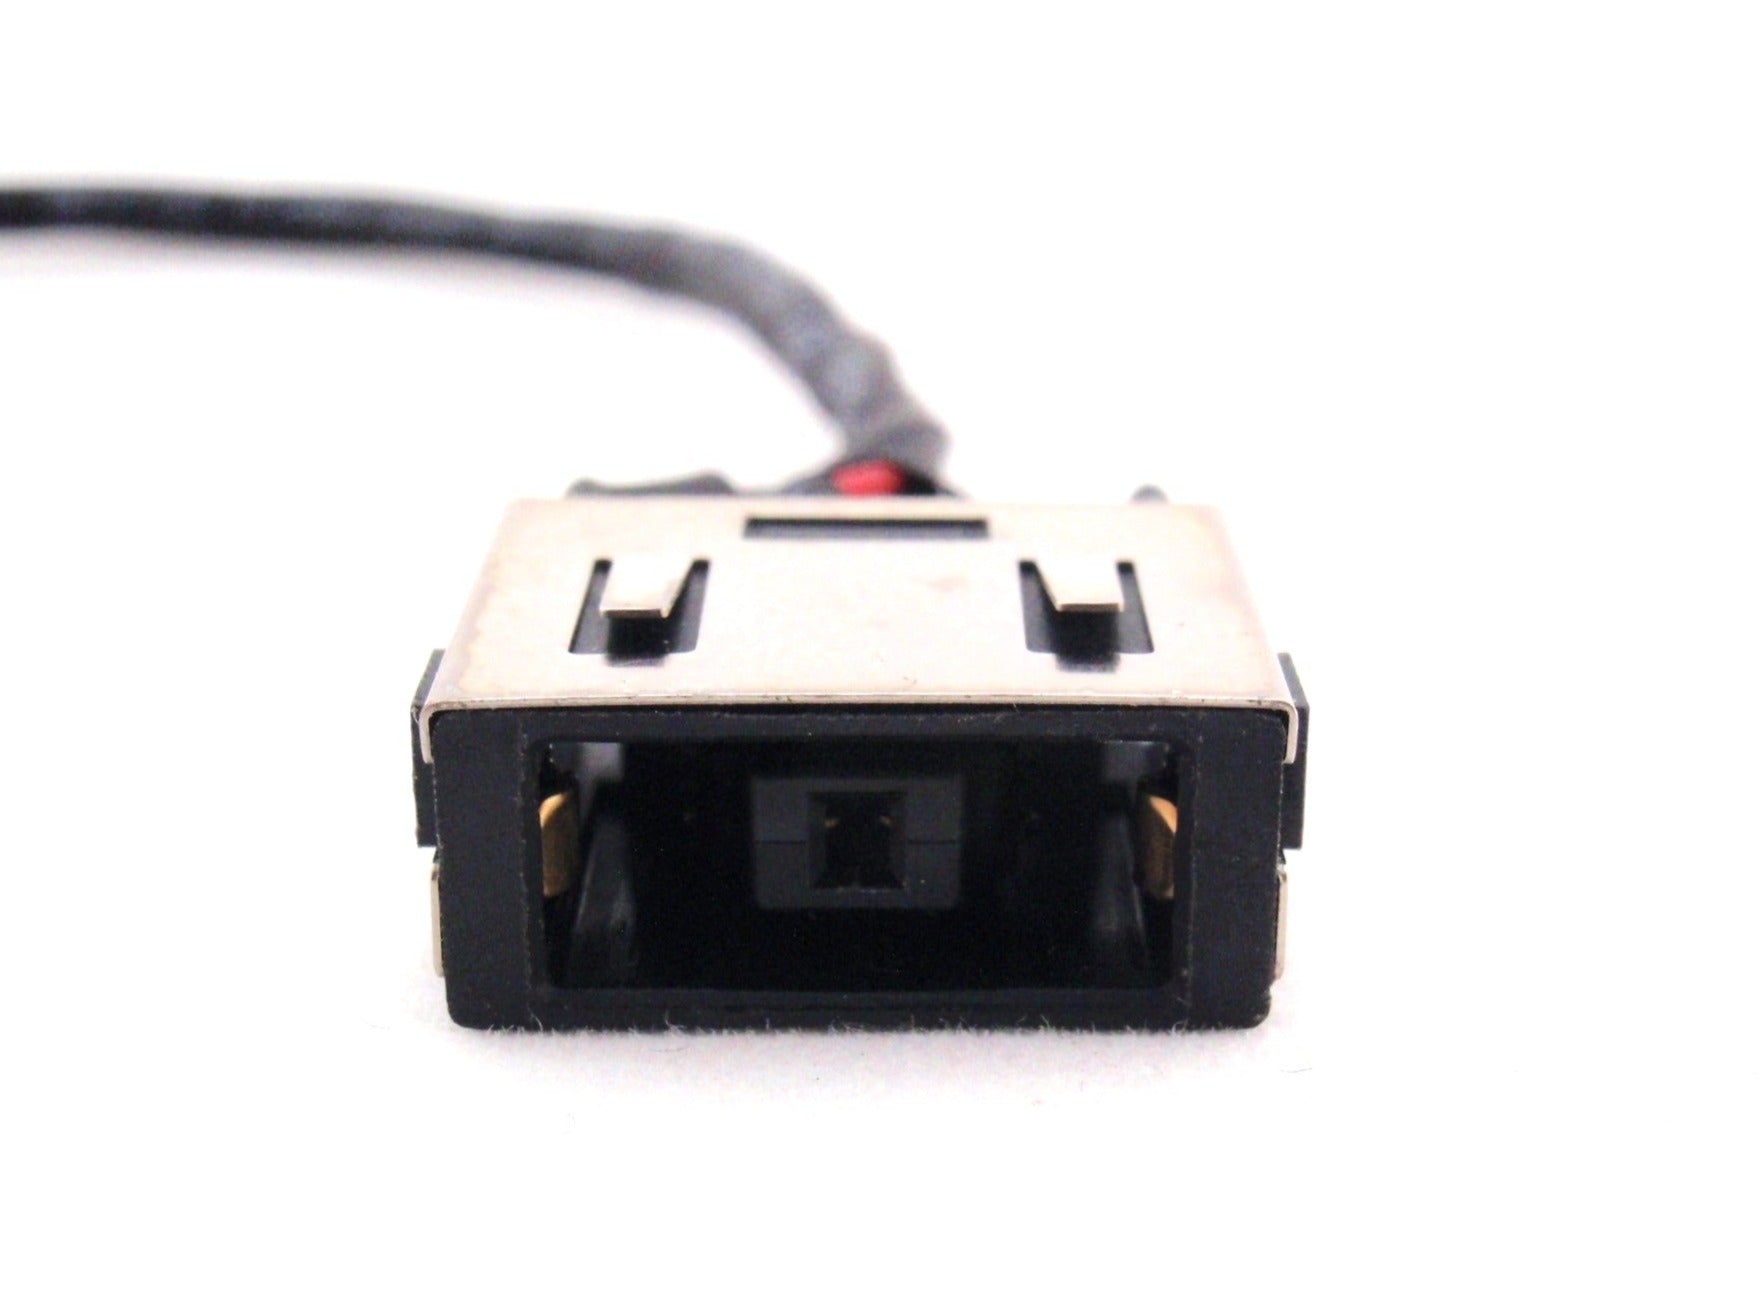 Lenovo New DC In Power Jack Charging Port Connector Socket Cable Harness AILZA IdeaPad Z510 DC30100KT00 90203974